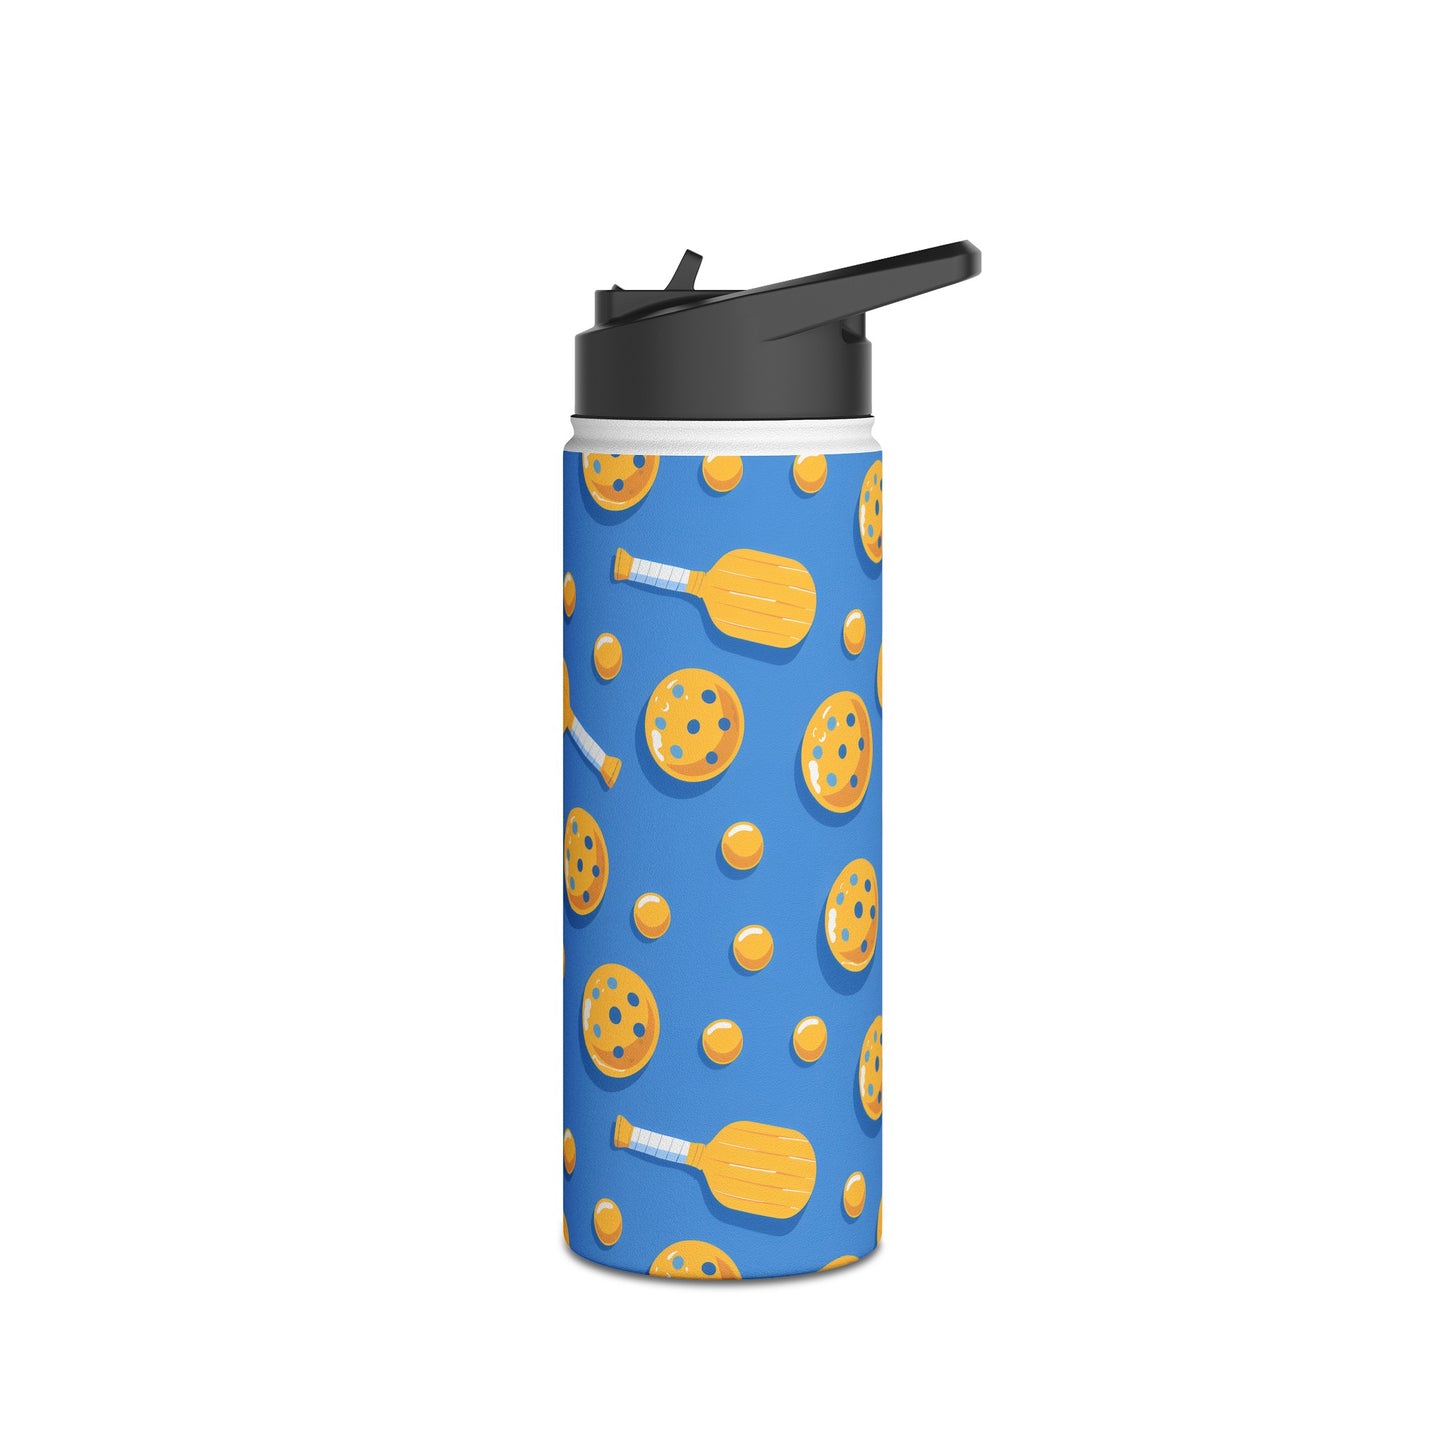 Stainless Steel Water Bottle Thermos, 18oz, Pickleball Paddle - Double Wall Insulation Keeps Drinks Hot or Cold